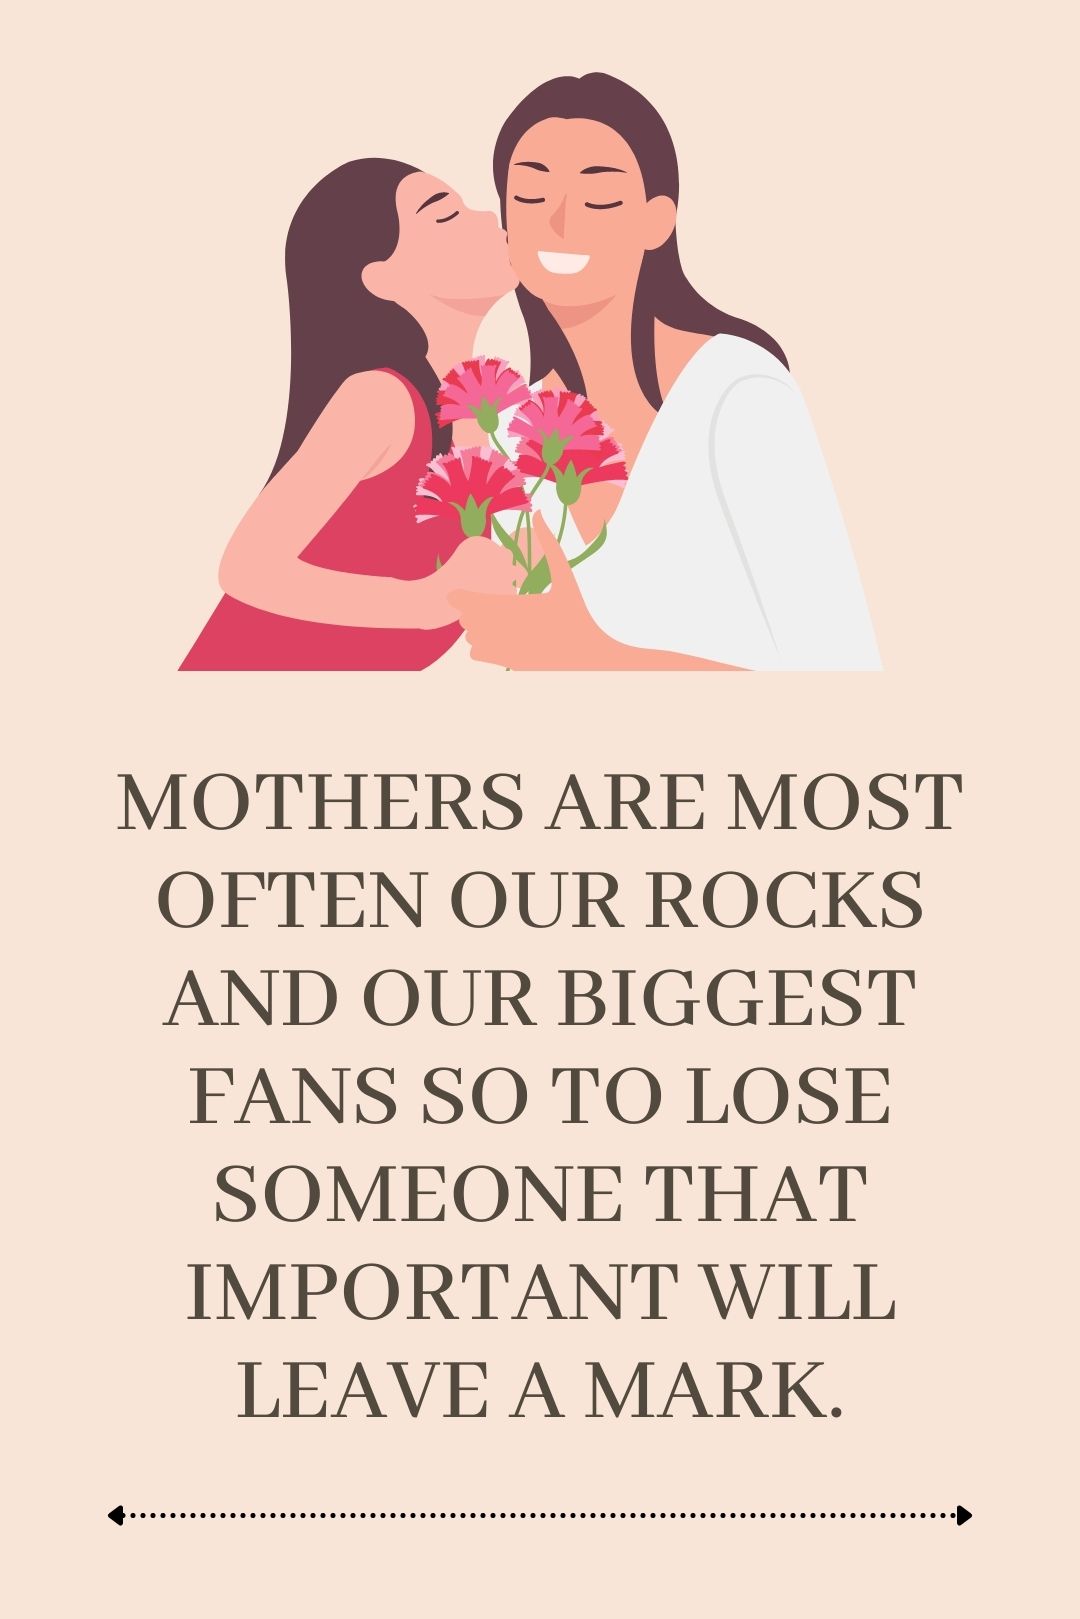 Mothers are most often our rocks and our biggest fans so to lose someone that important will leave a mark.